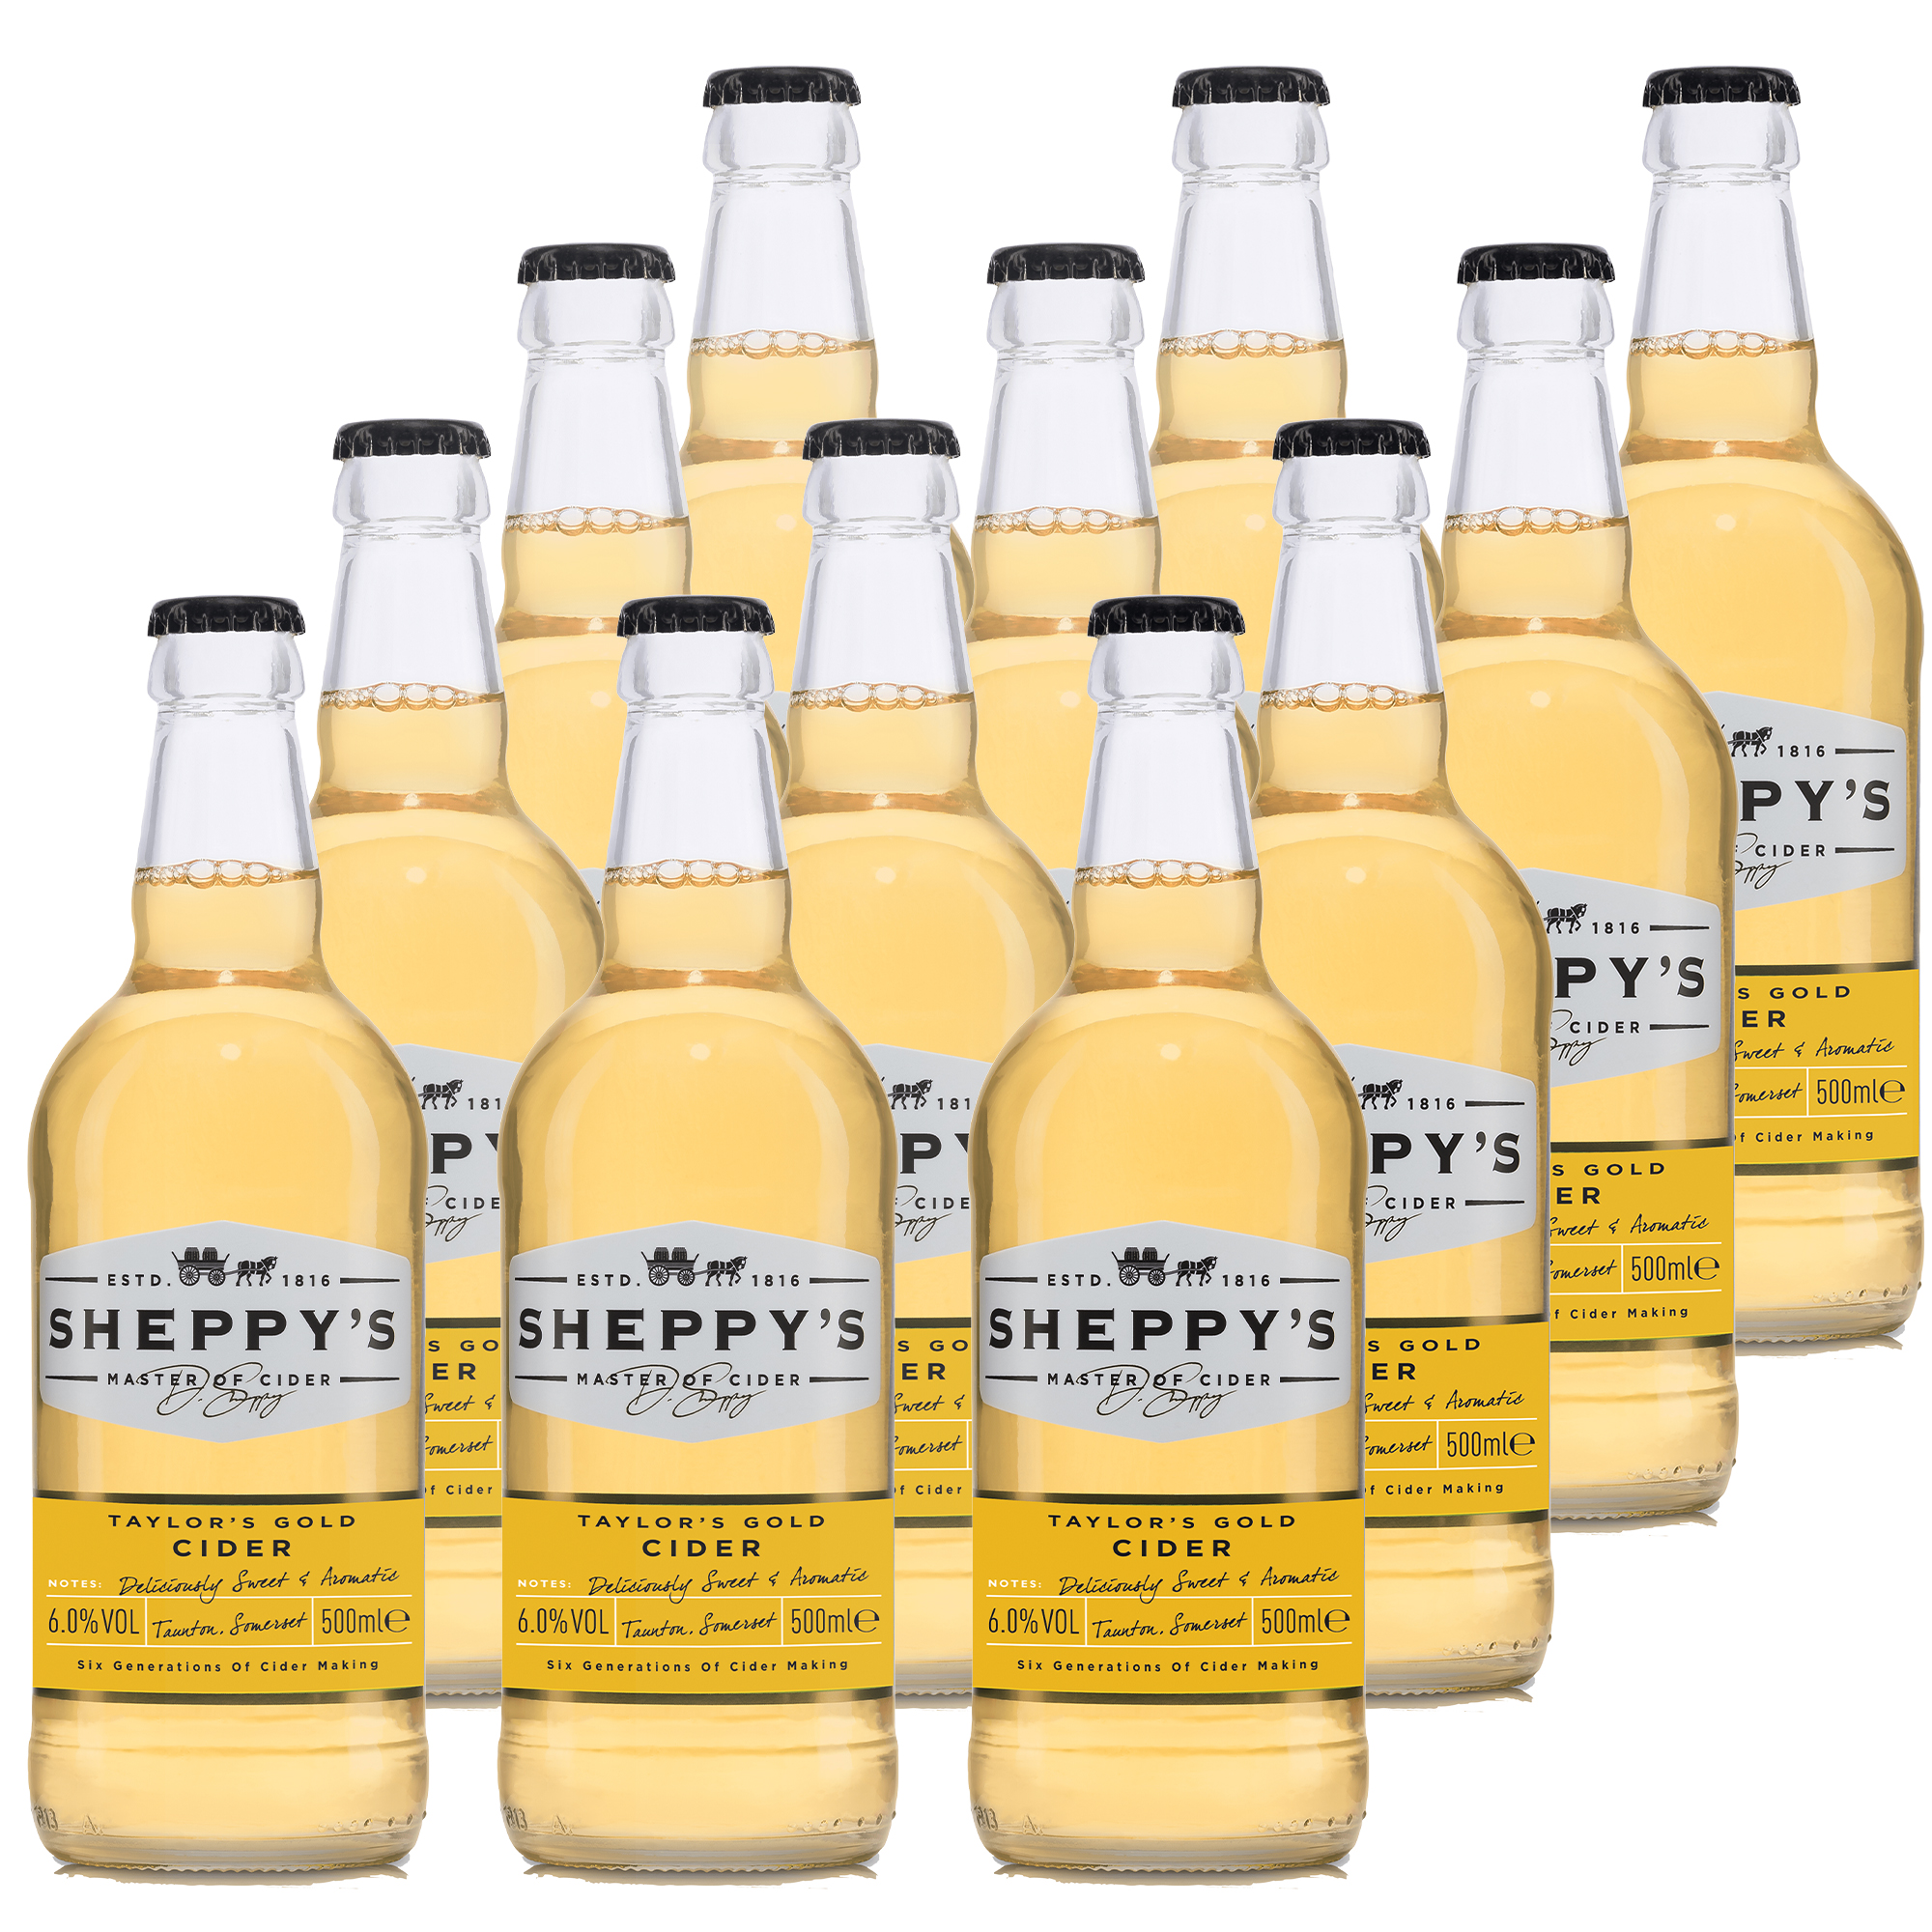 Sheppy's Taylor's Gold Cider 12x500ml